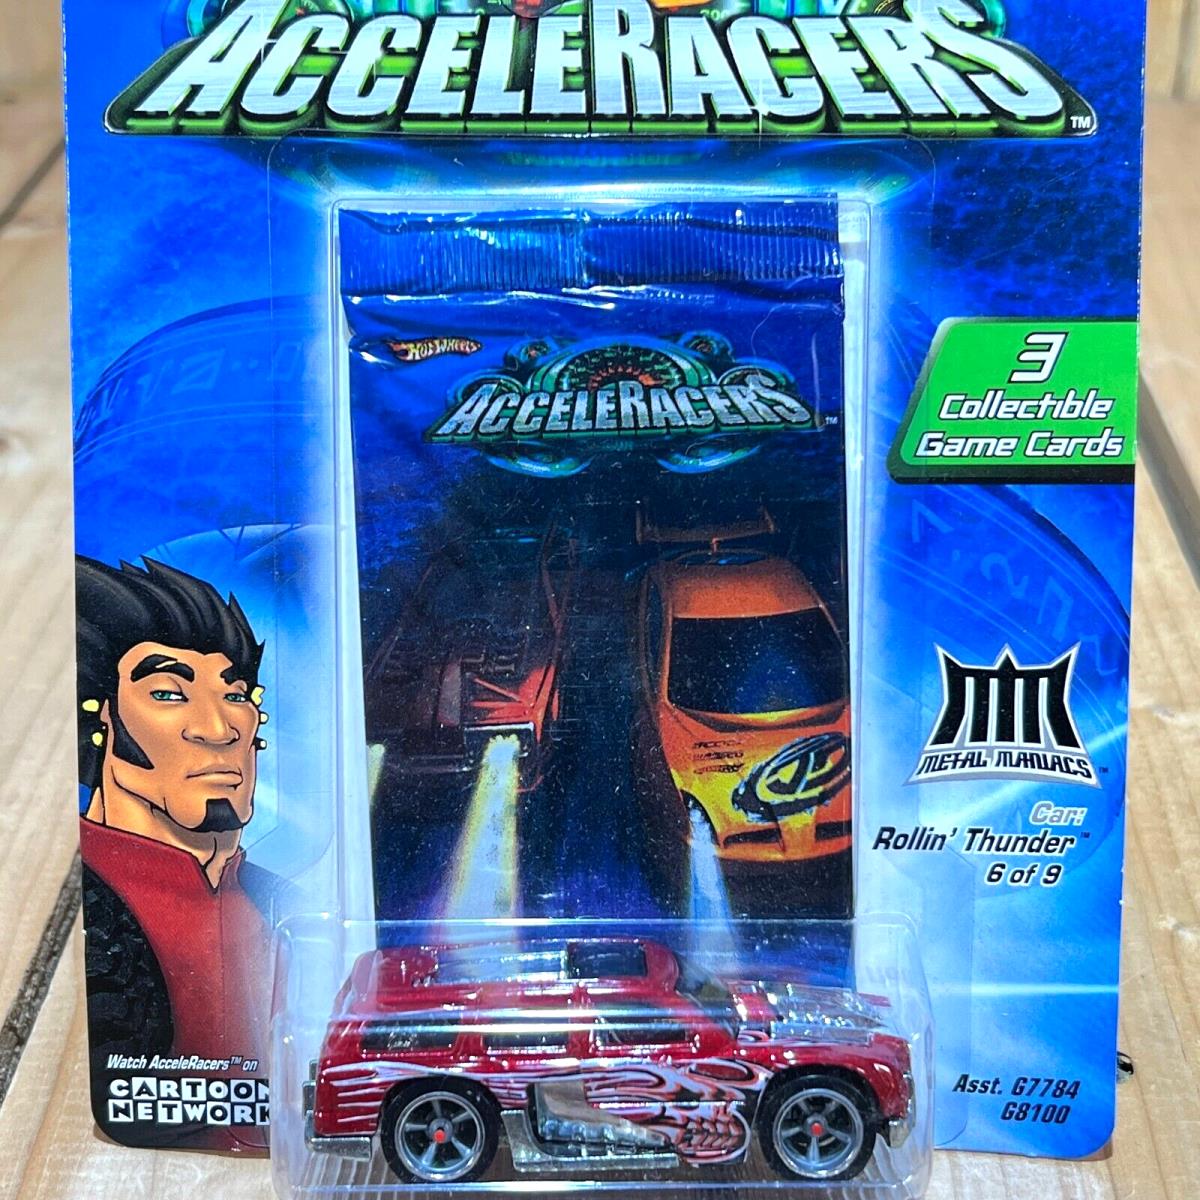 Vintage Hot Wheels Acceleracers Metal Maniacs Rollin` Thunder Pack of 3 Cards